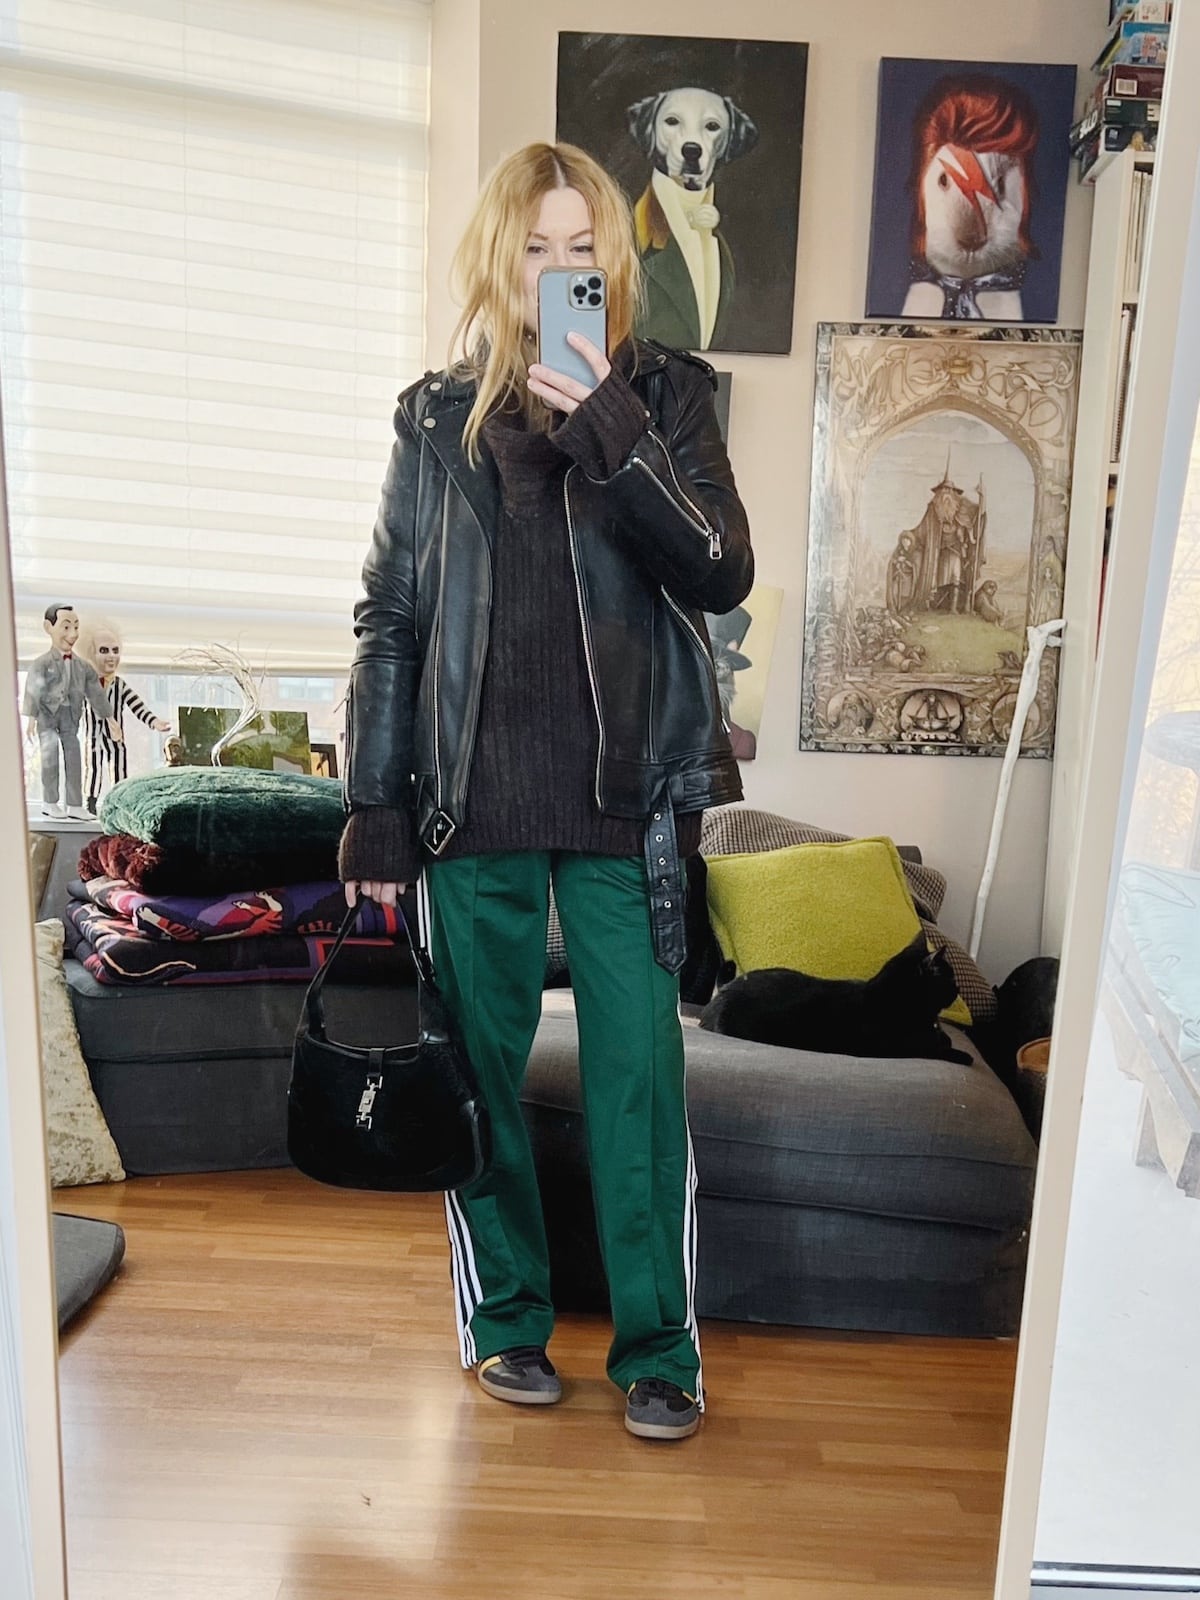 A blonde woman is wearing a sweater, adidas track pants, an oversized moto jacket, sneakers, and a vintage Gucci bag.